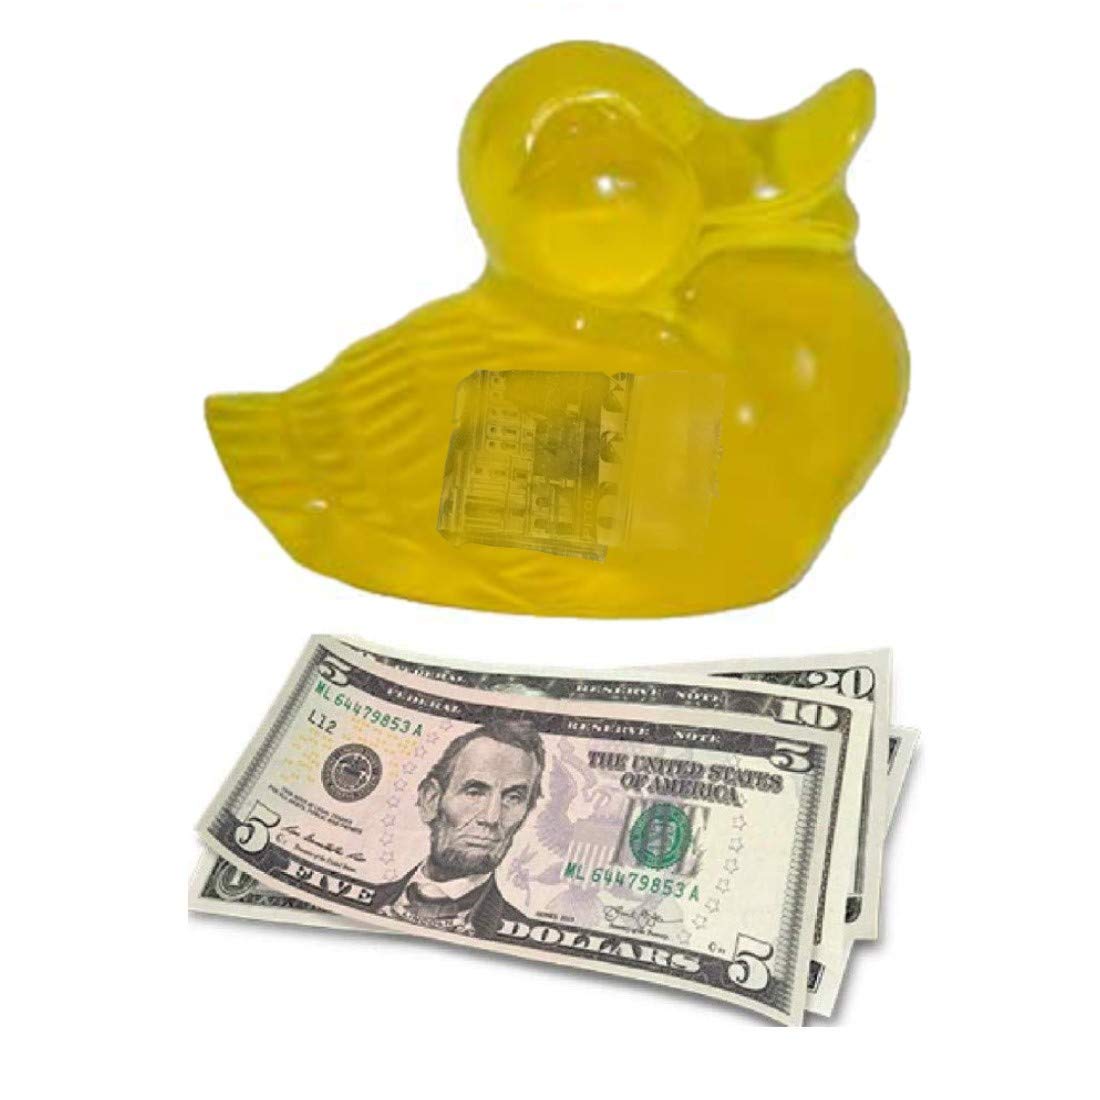 The Smiling Easter Duck Real Cash Money Soap - Each Bar Contains a Real US  Bill - Up to $100